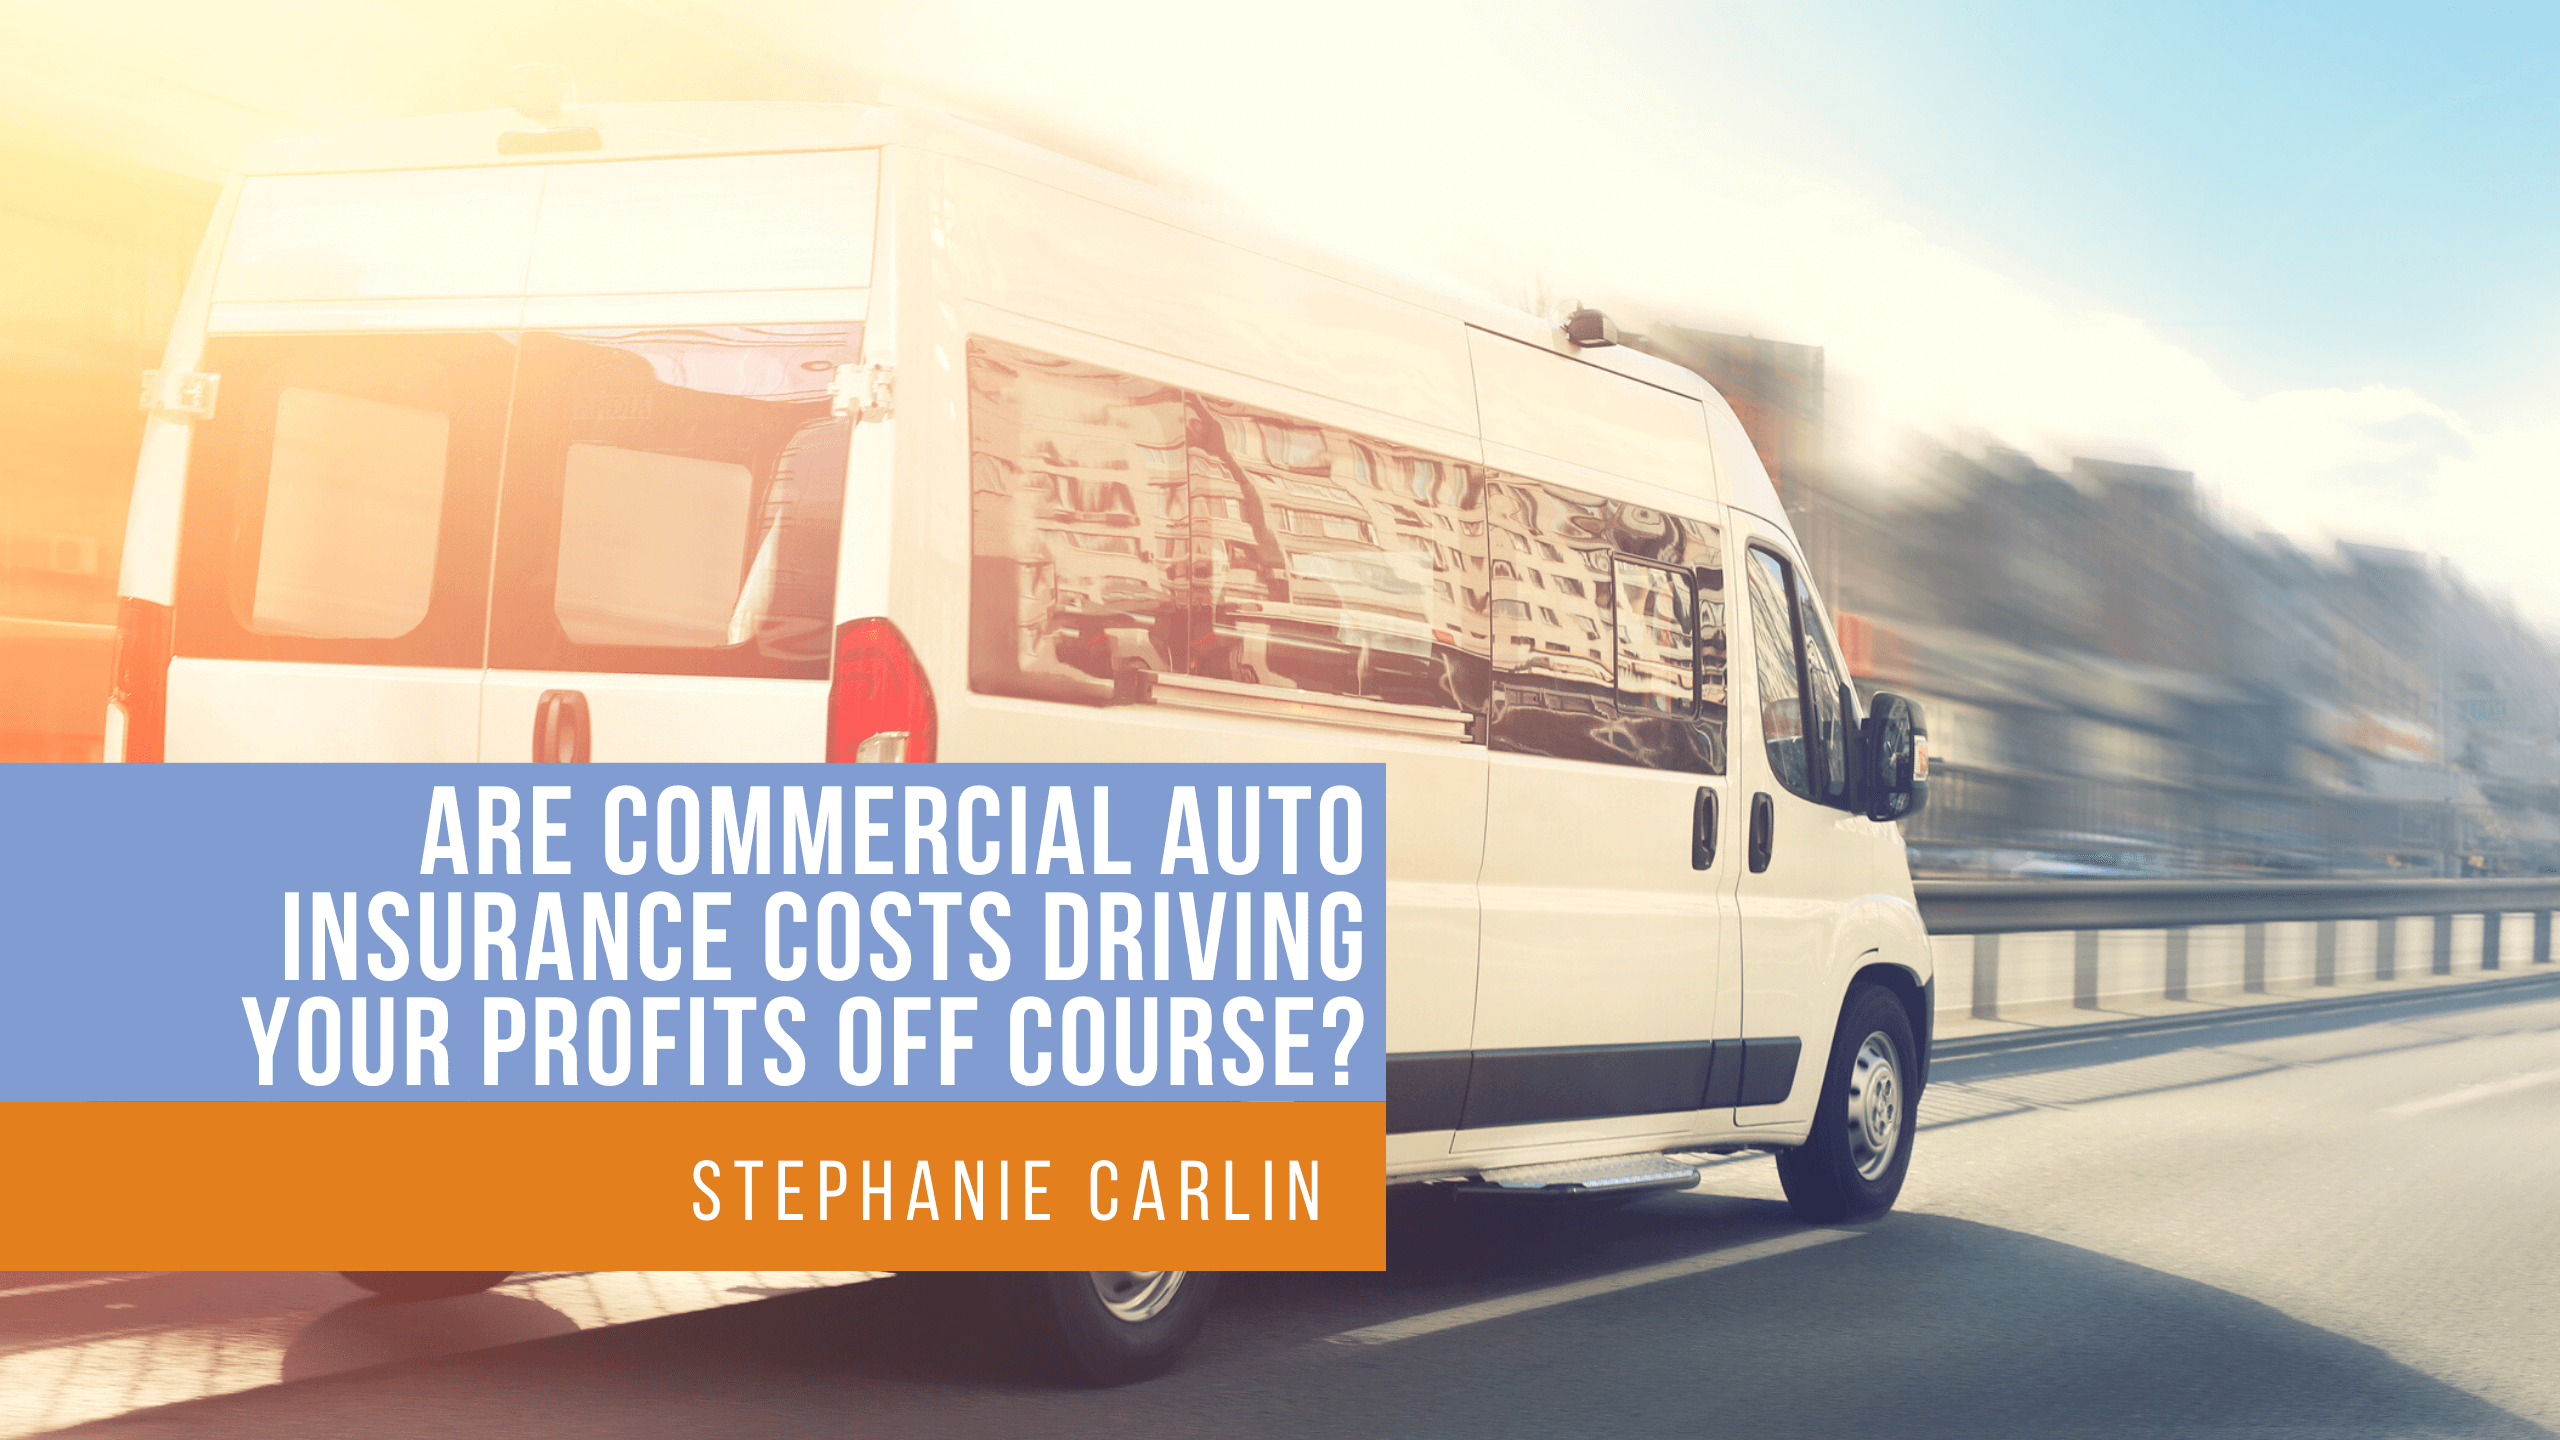 Are Commercial Auto Insurance Costs Driving Your Profits Off Course?